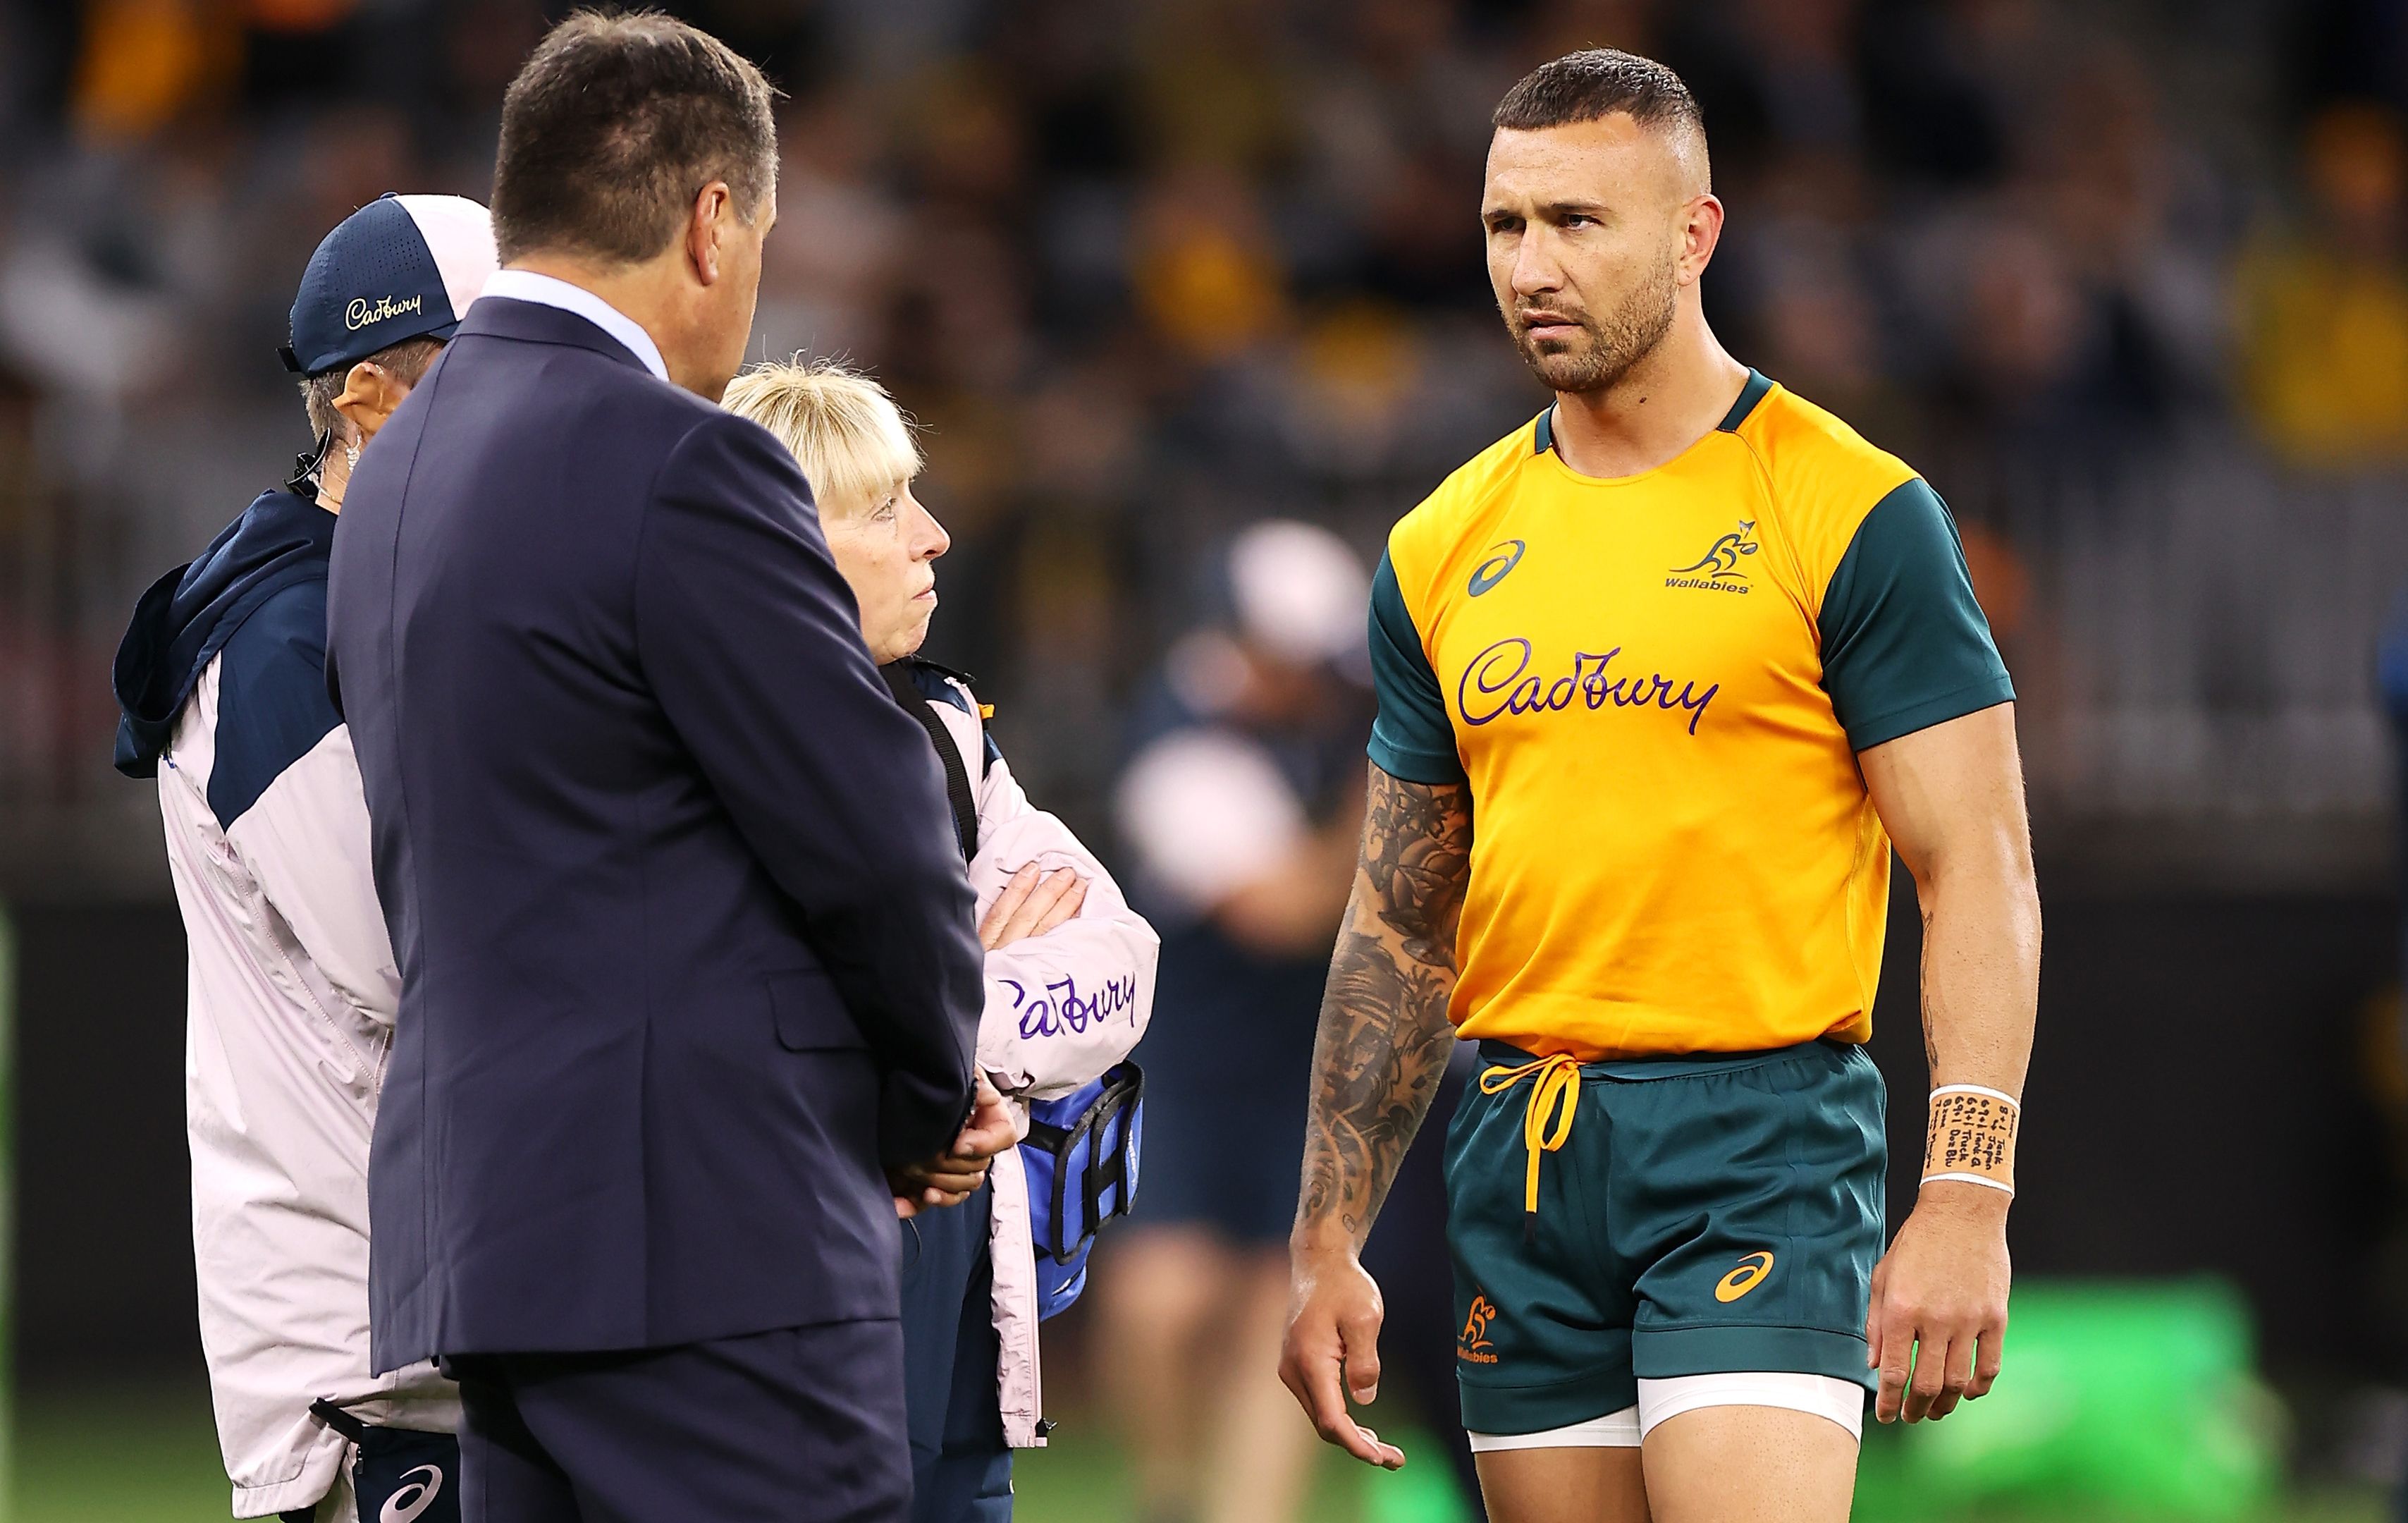 Wallabies' hopes take a hit after Quade Cooper gets scratched from starting line-up